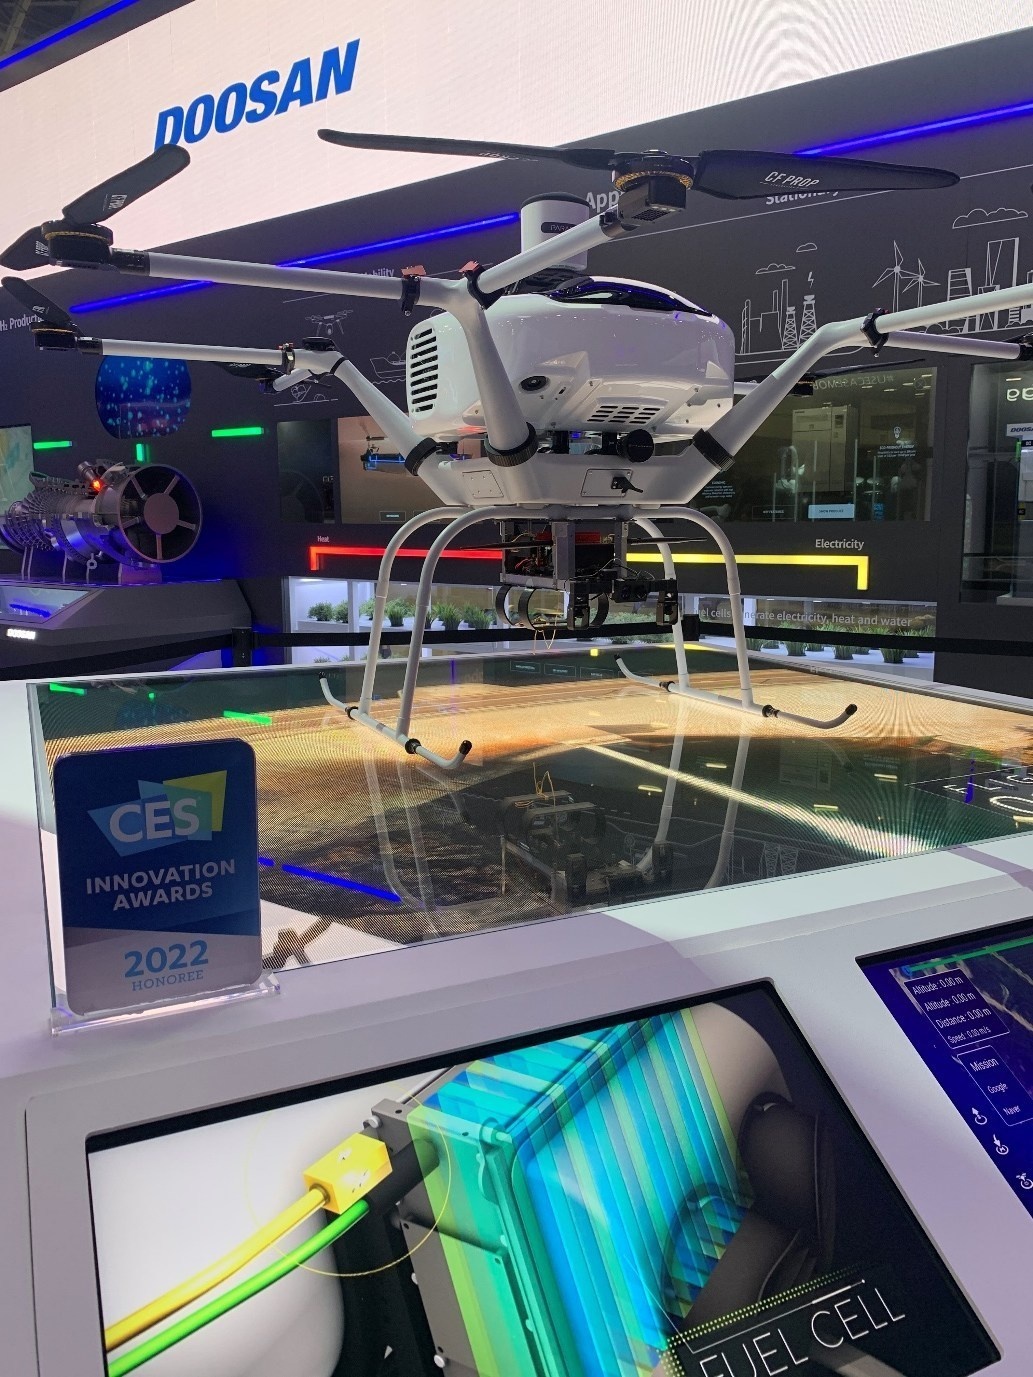 A delivery drone at an exhibition